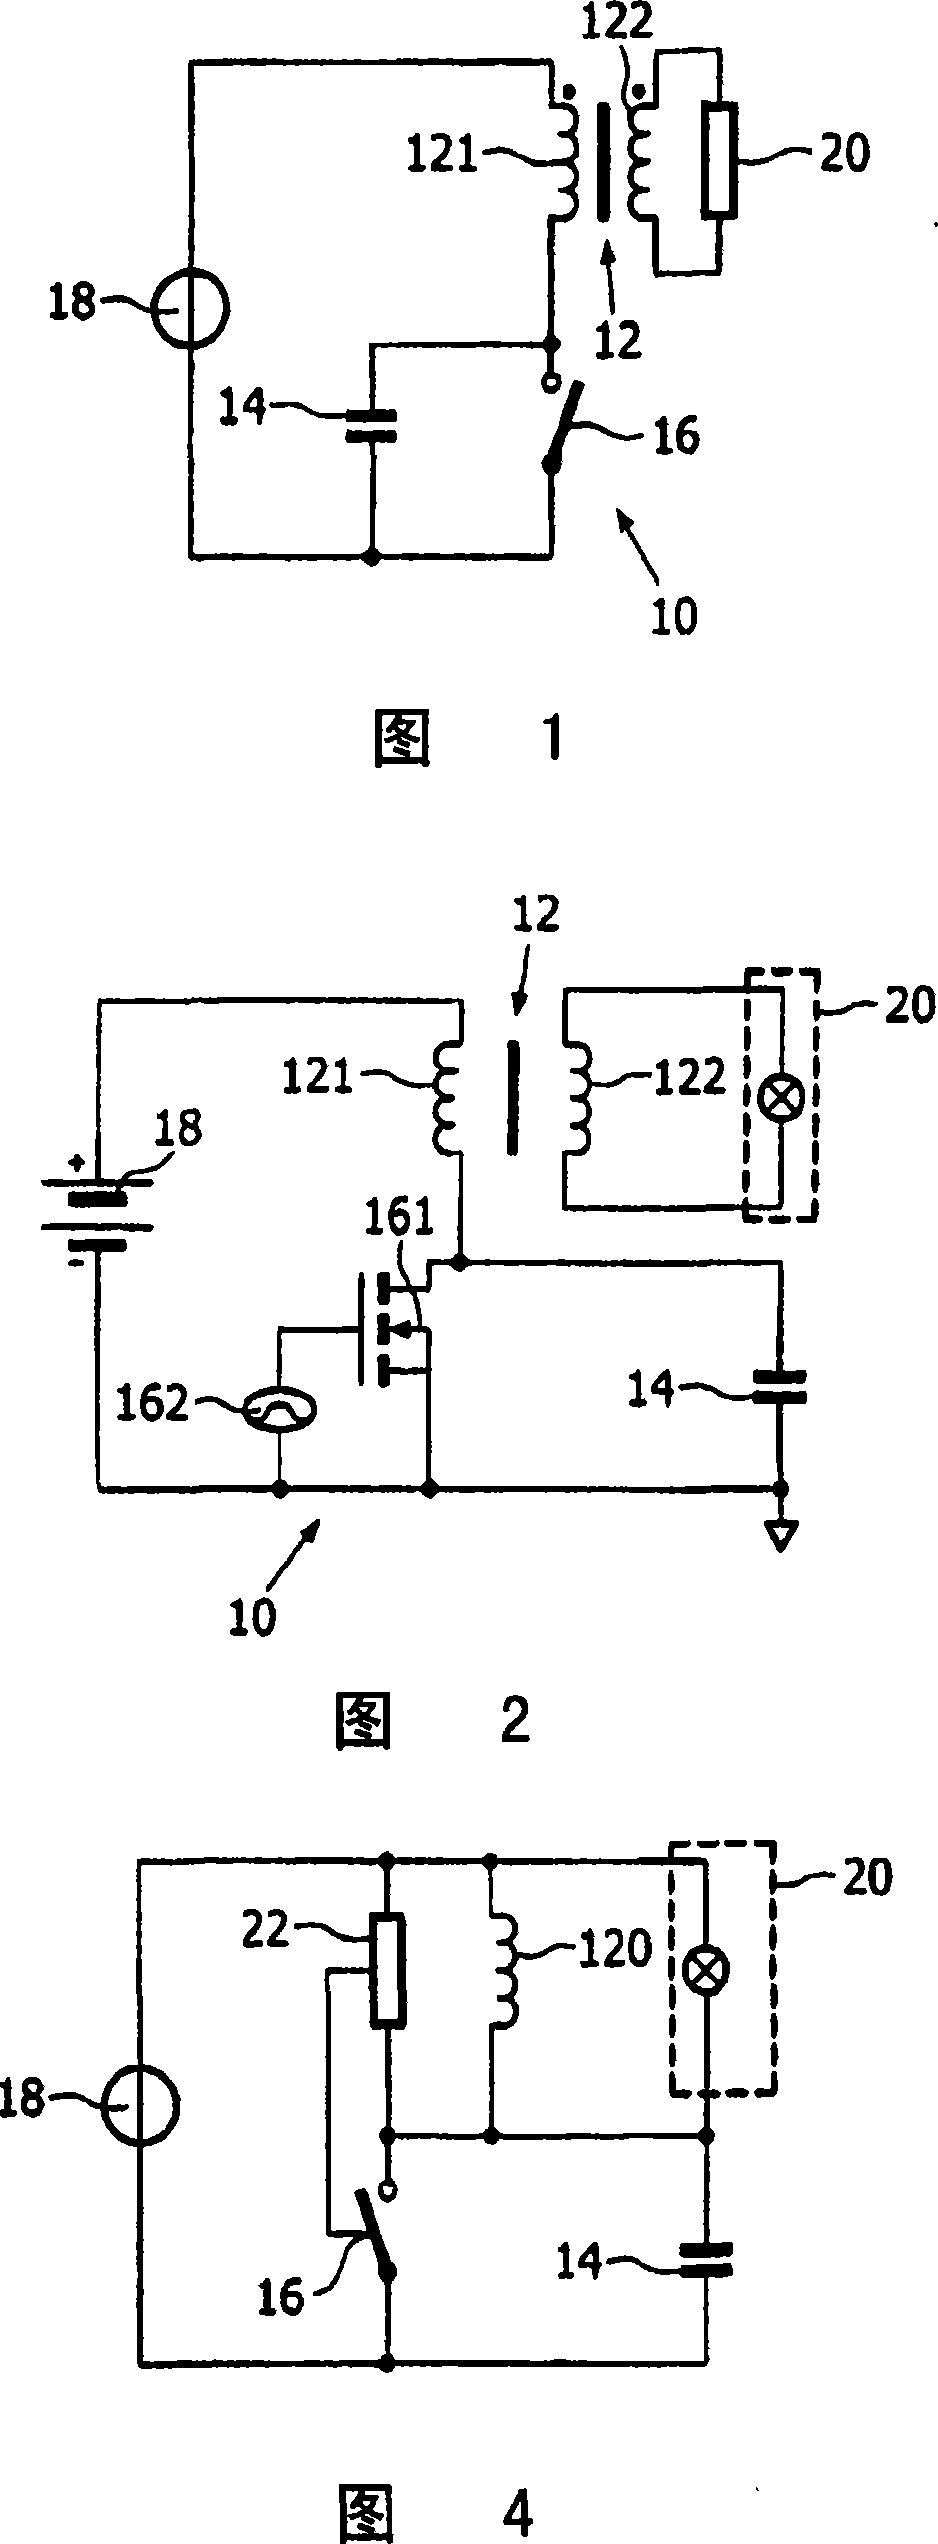 Multi-pulse ignition circuit for a gas discharge lamp